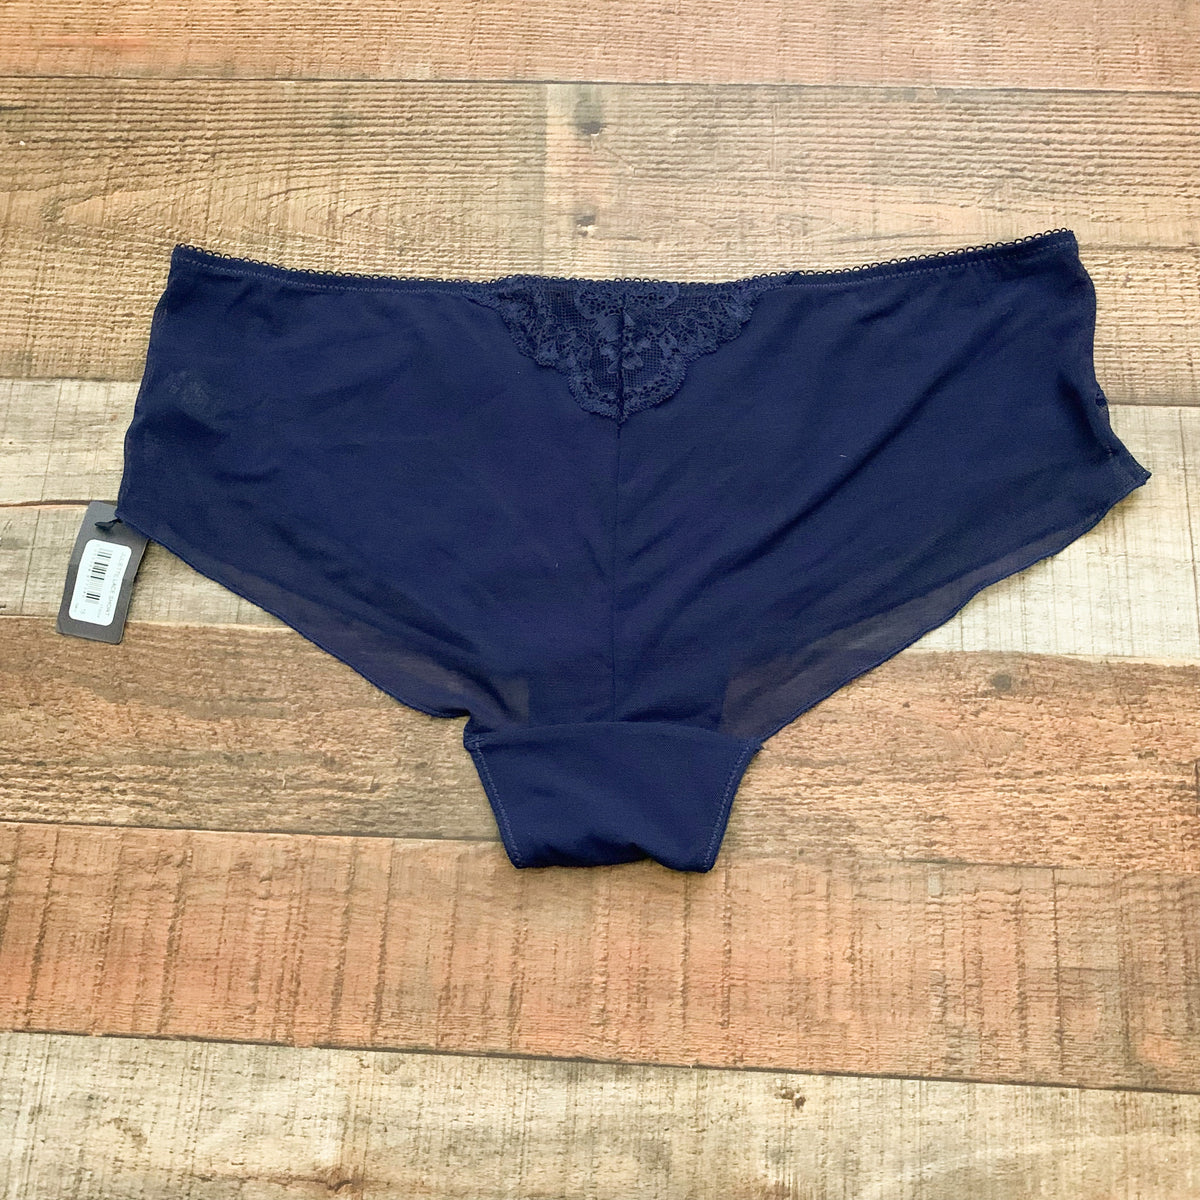 Figleaves juliette lace thong in navy